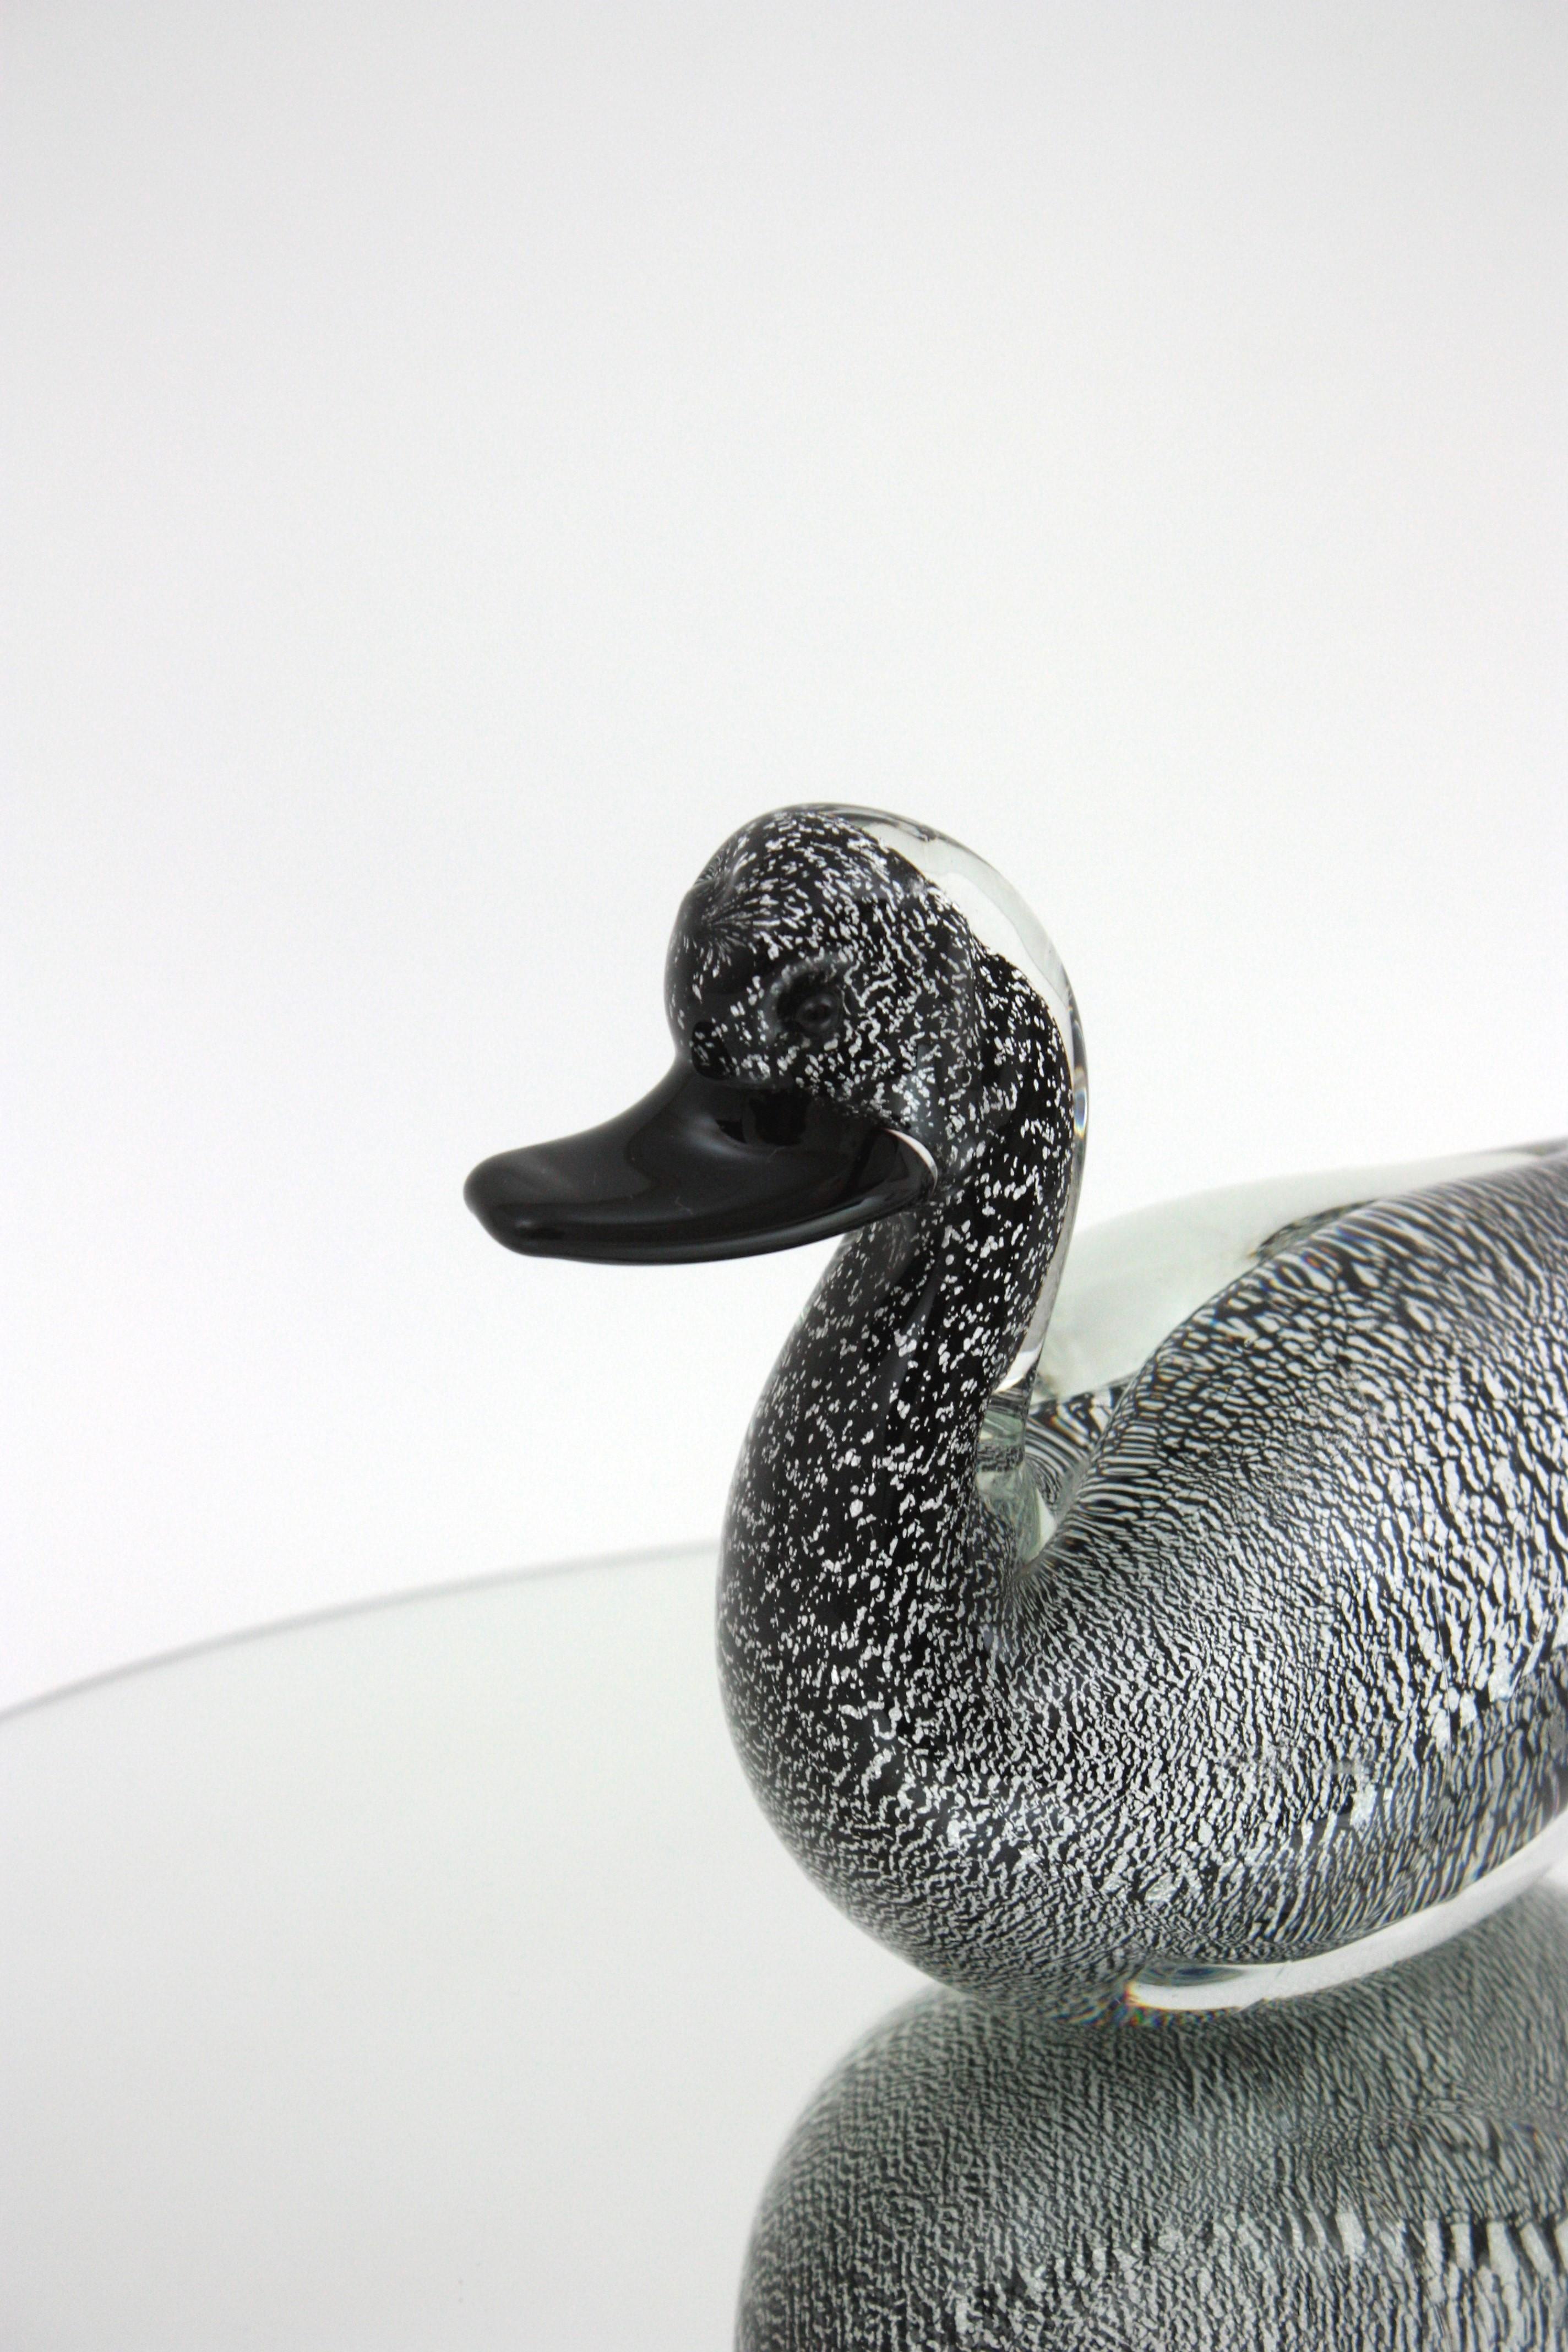  Murano Black Clear Duck Sculpture Art Glass Paperweight with Silver Flecks In Excellent Condition For Sale In Barcelona, ES